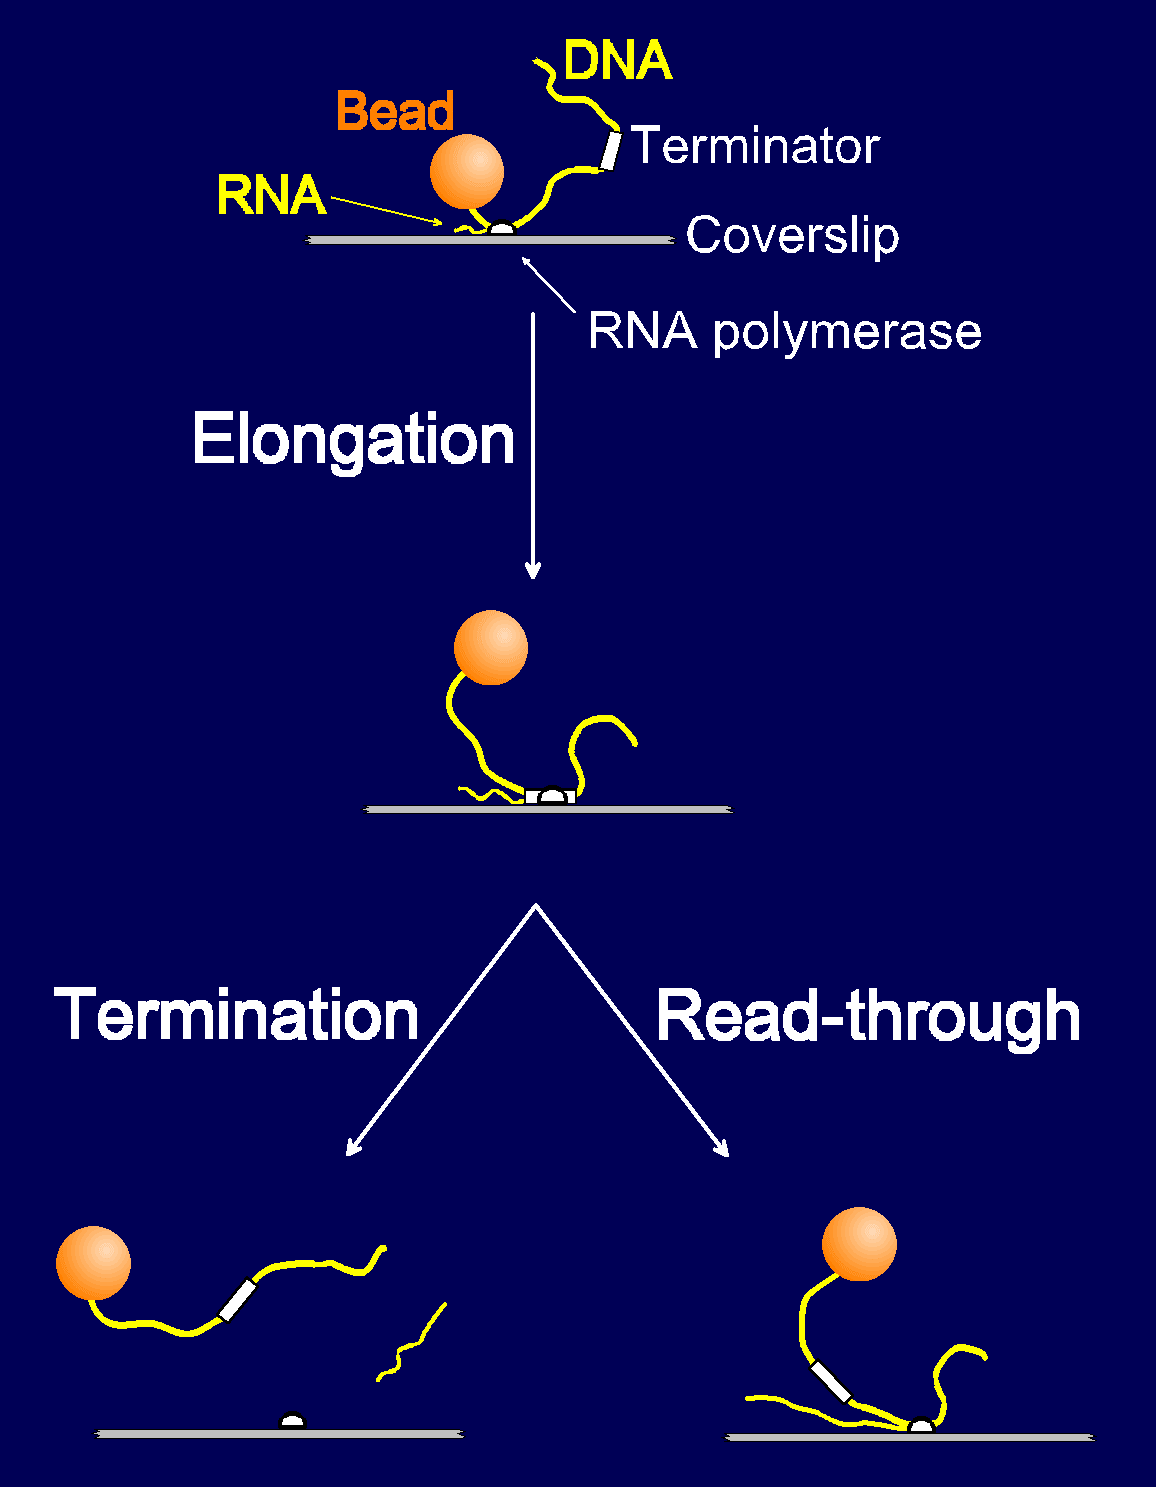 Single molecule termination experiment. Surface immobilized transcription complexes are labeled with a bead at one end of the template. RNAP moves along the template during elongation, changing the length of the DNA segment between the polymerase and the bead. On reaching the terminator, the enzyme either releases the DNA template and the RNA transcript (termination), or continues elongation through the terminator.